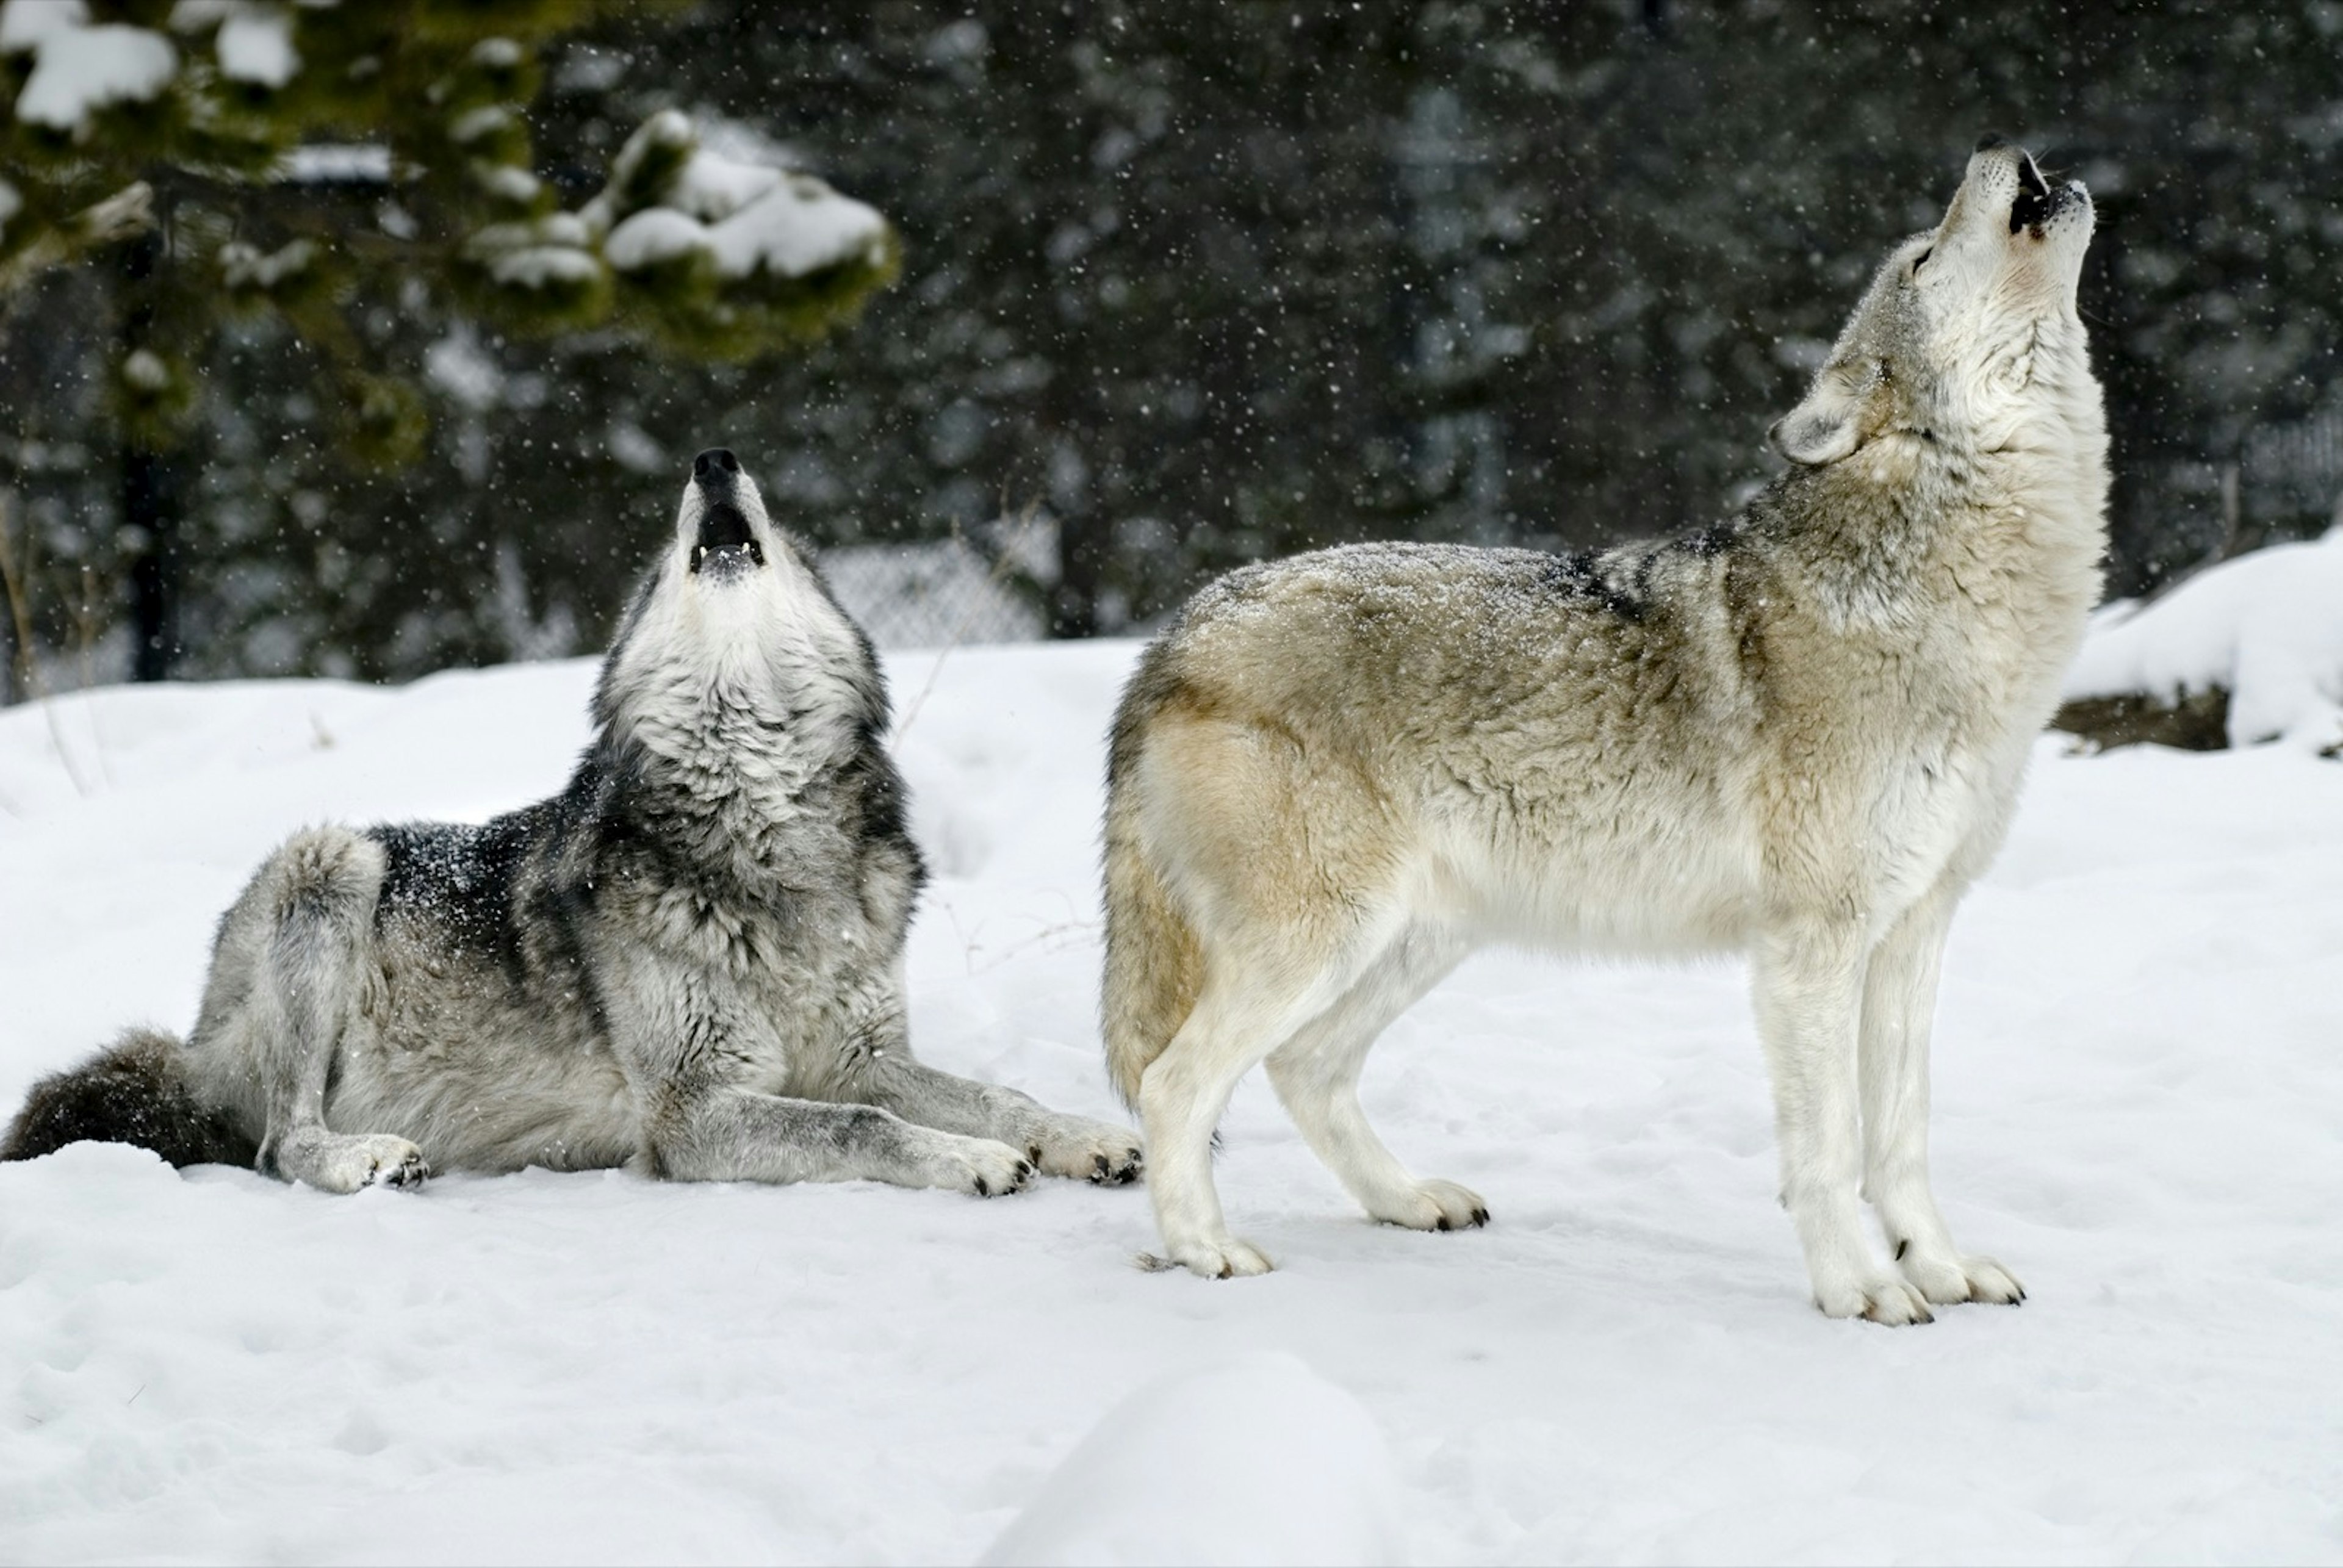 A pair of wolves, both howling with mouths open and snow falling around